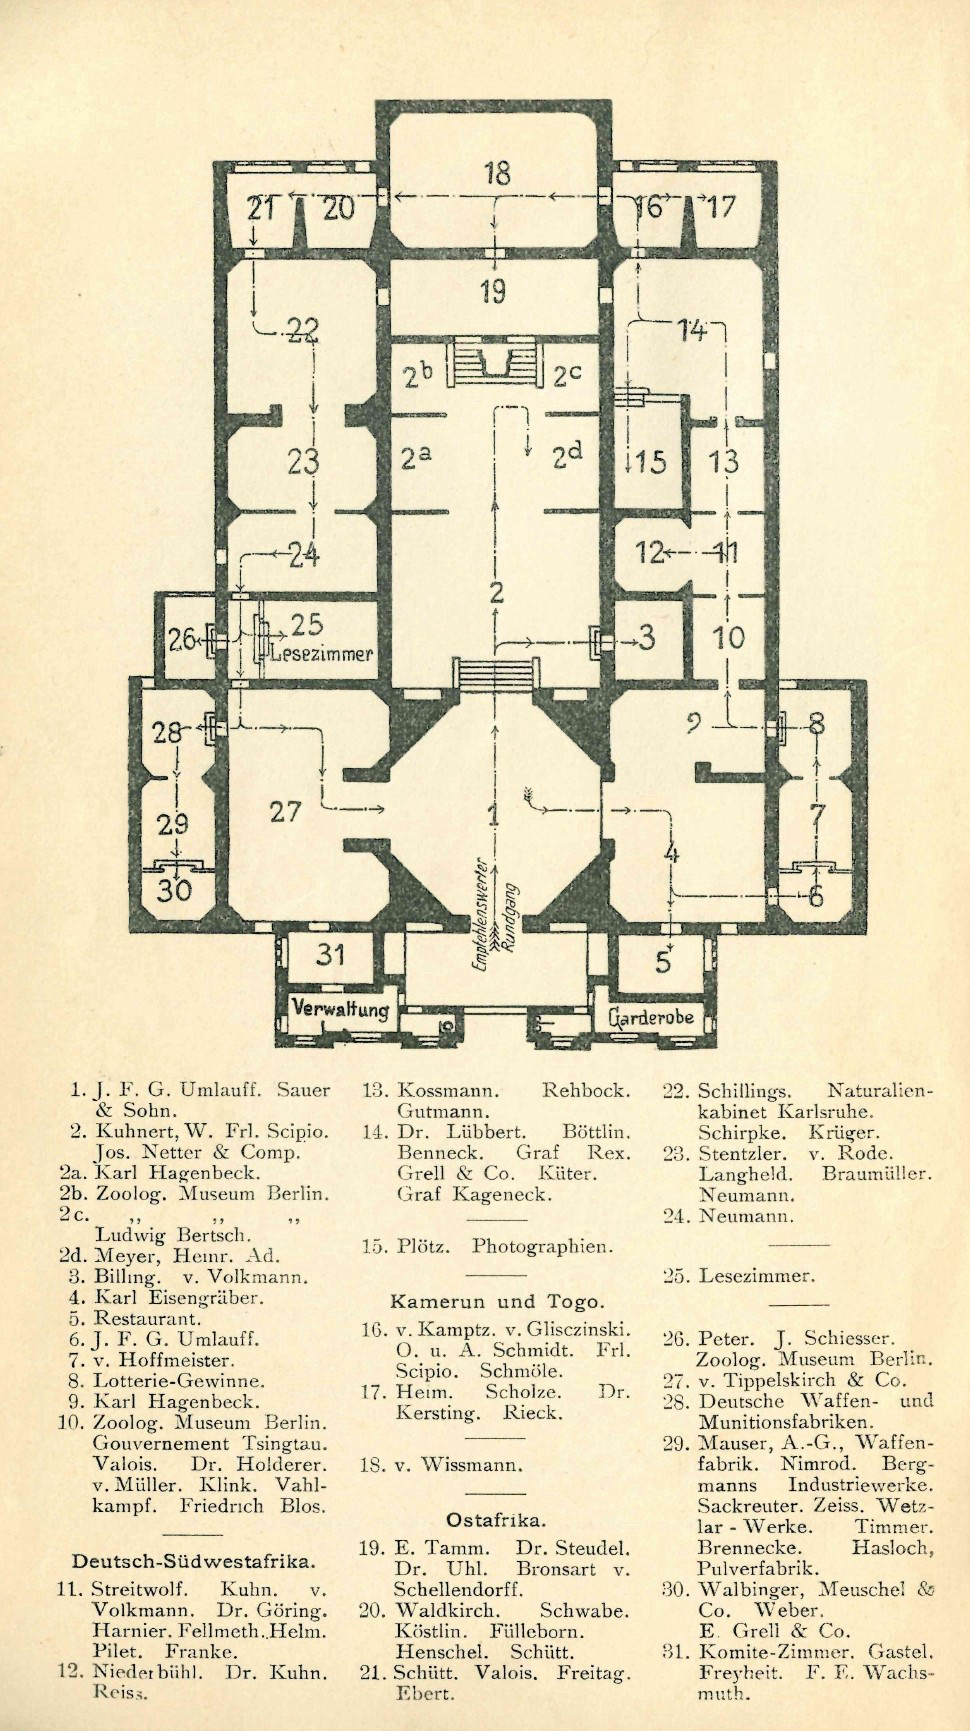 A floor plan with a legend explaining the numbers of 31 individual rooms drawn on the plan.